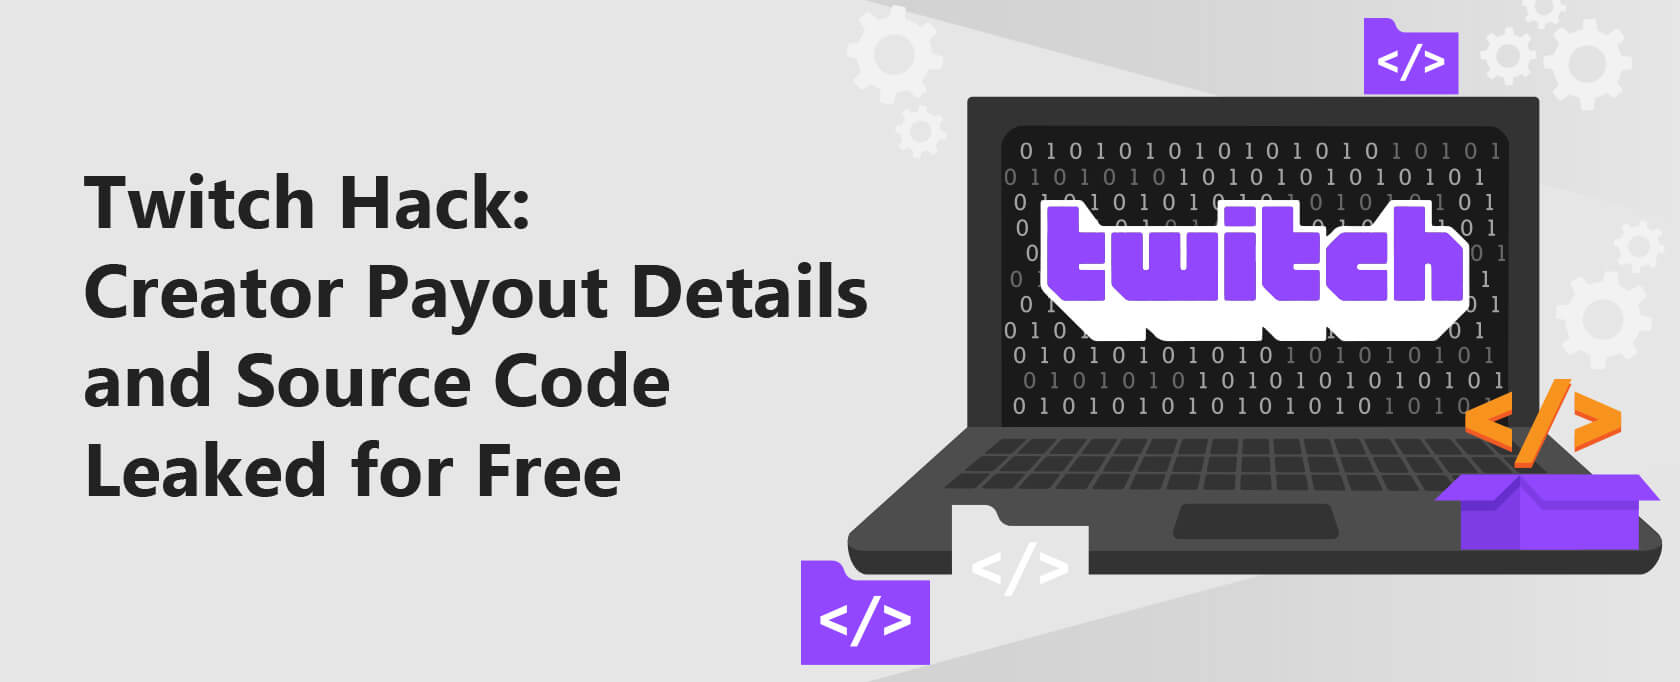 Twitch Hack: Creator Payout Details and Source Code Leaked for Free